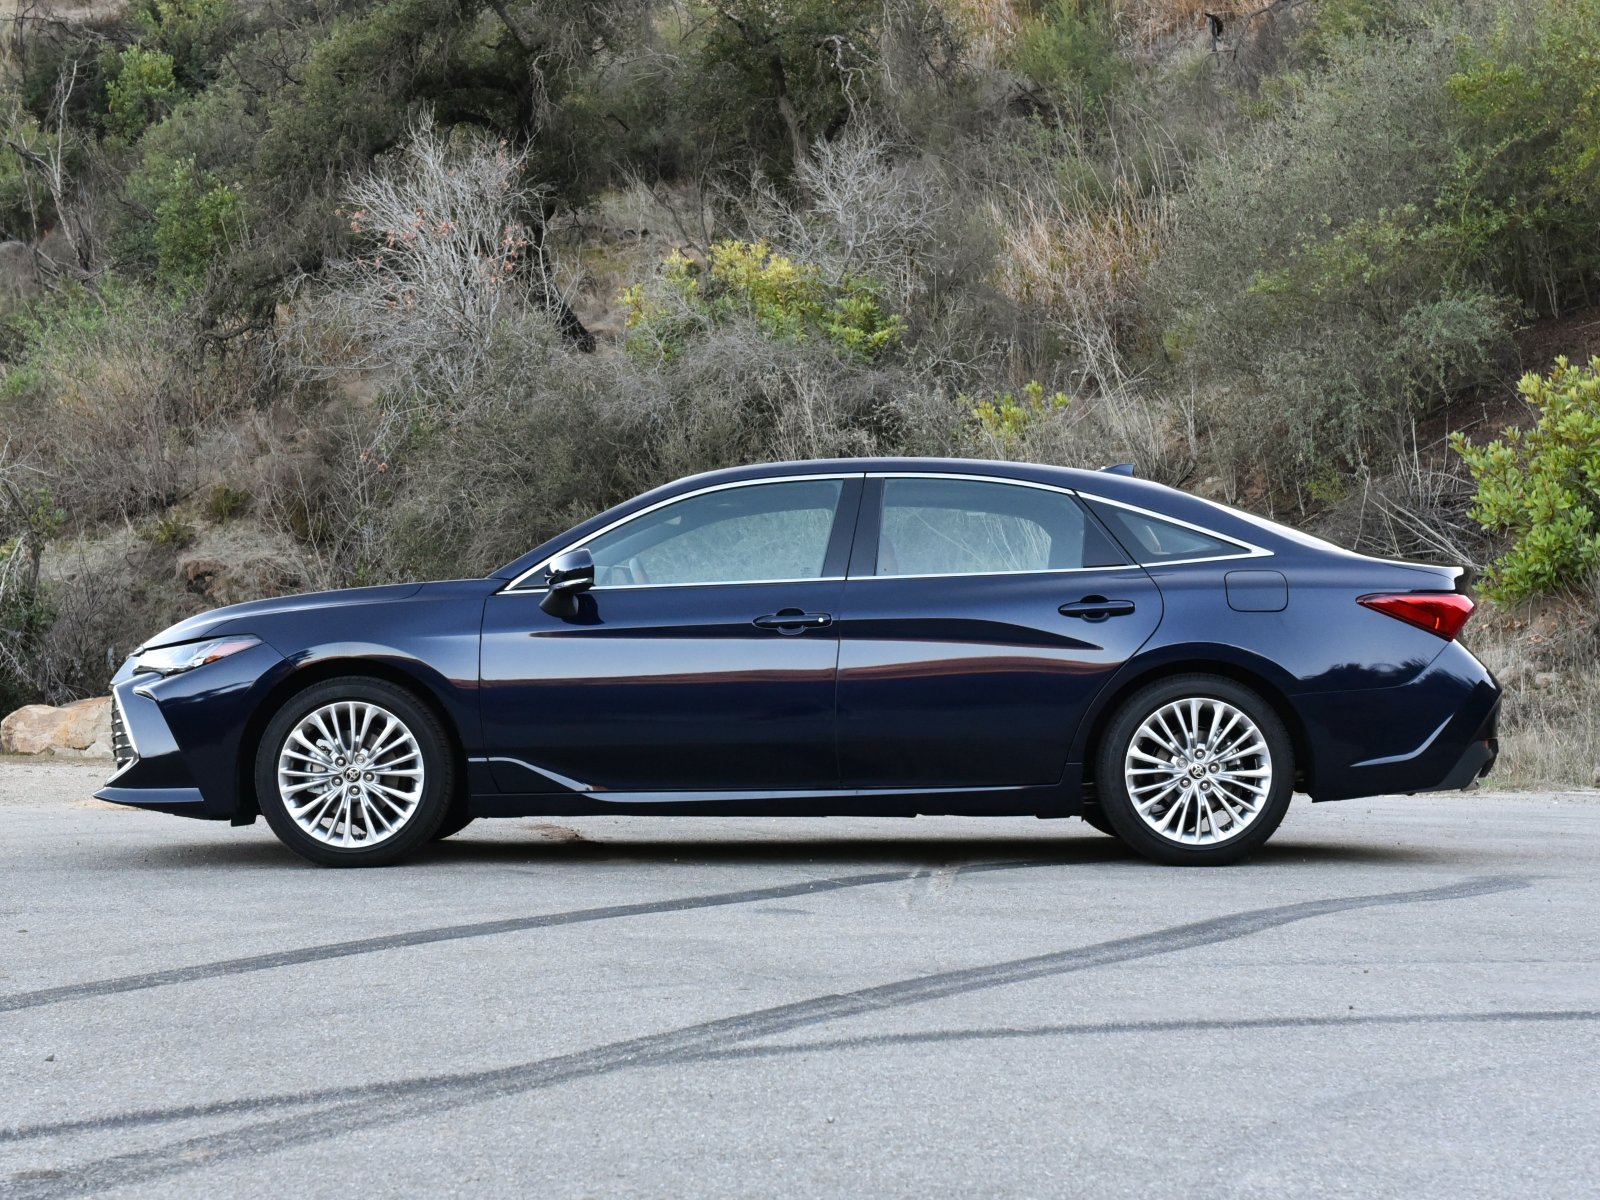 Video Review: 2021 Toyota Avalon Expert Test Drive - CarGurus